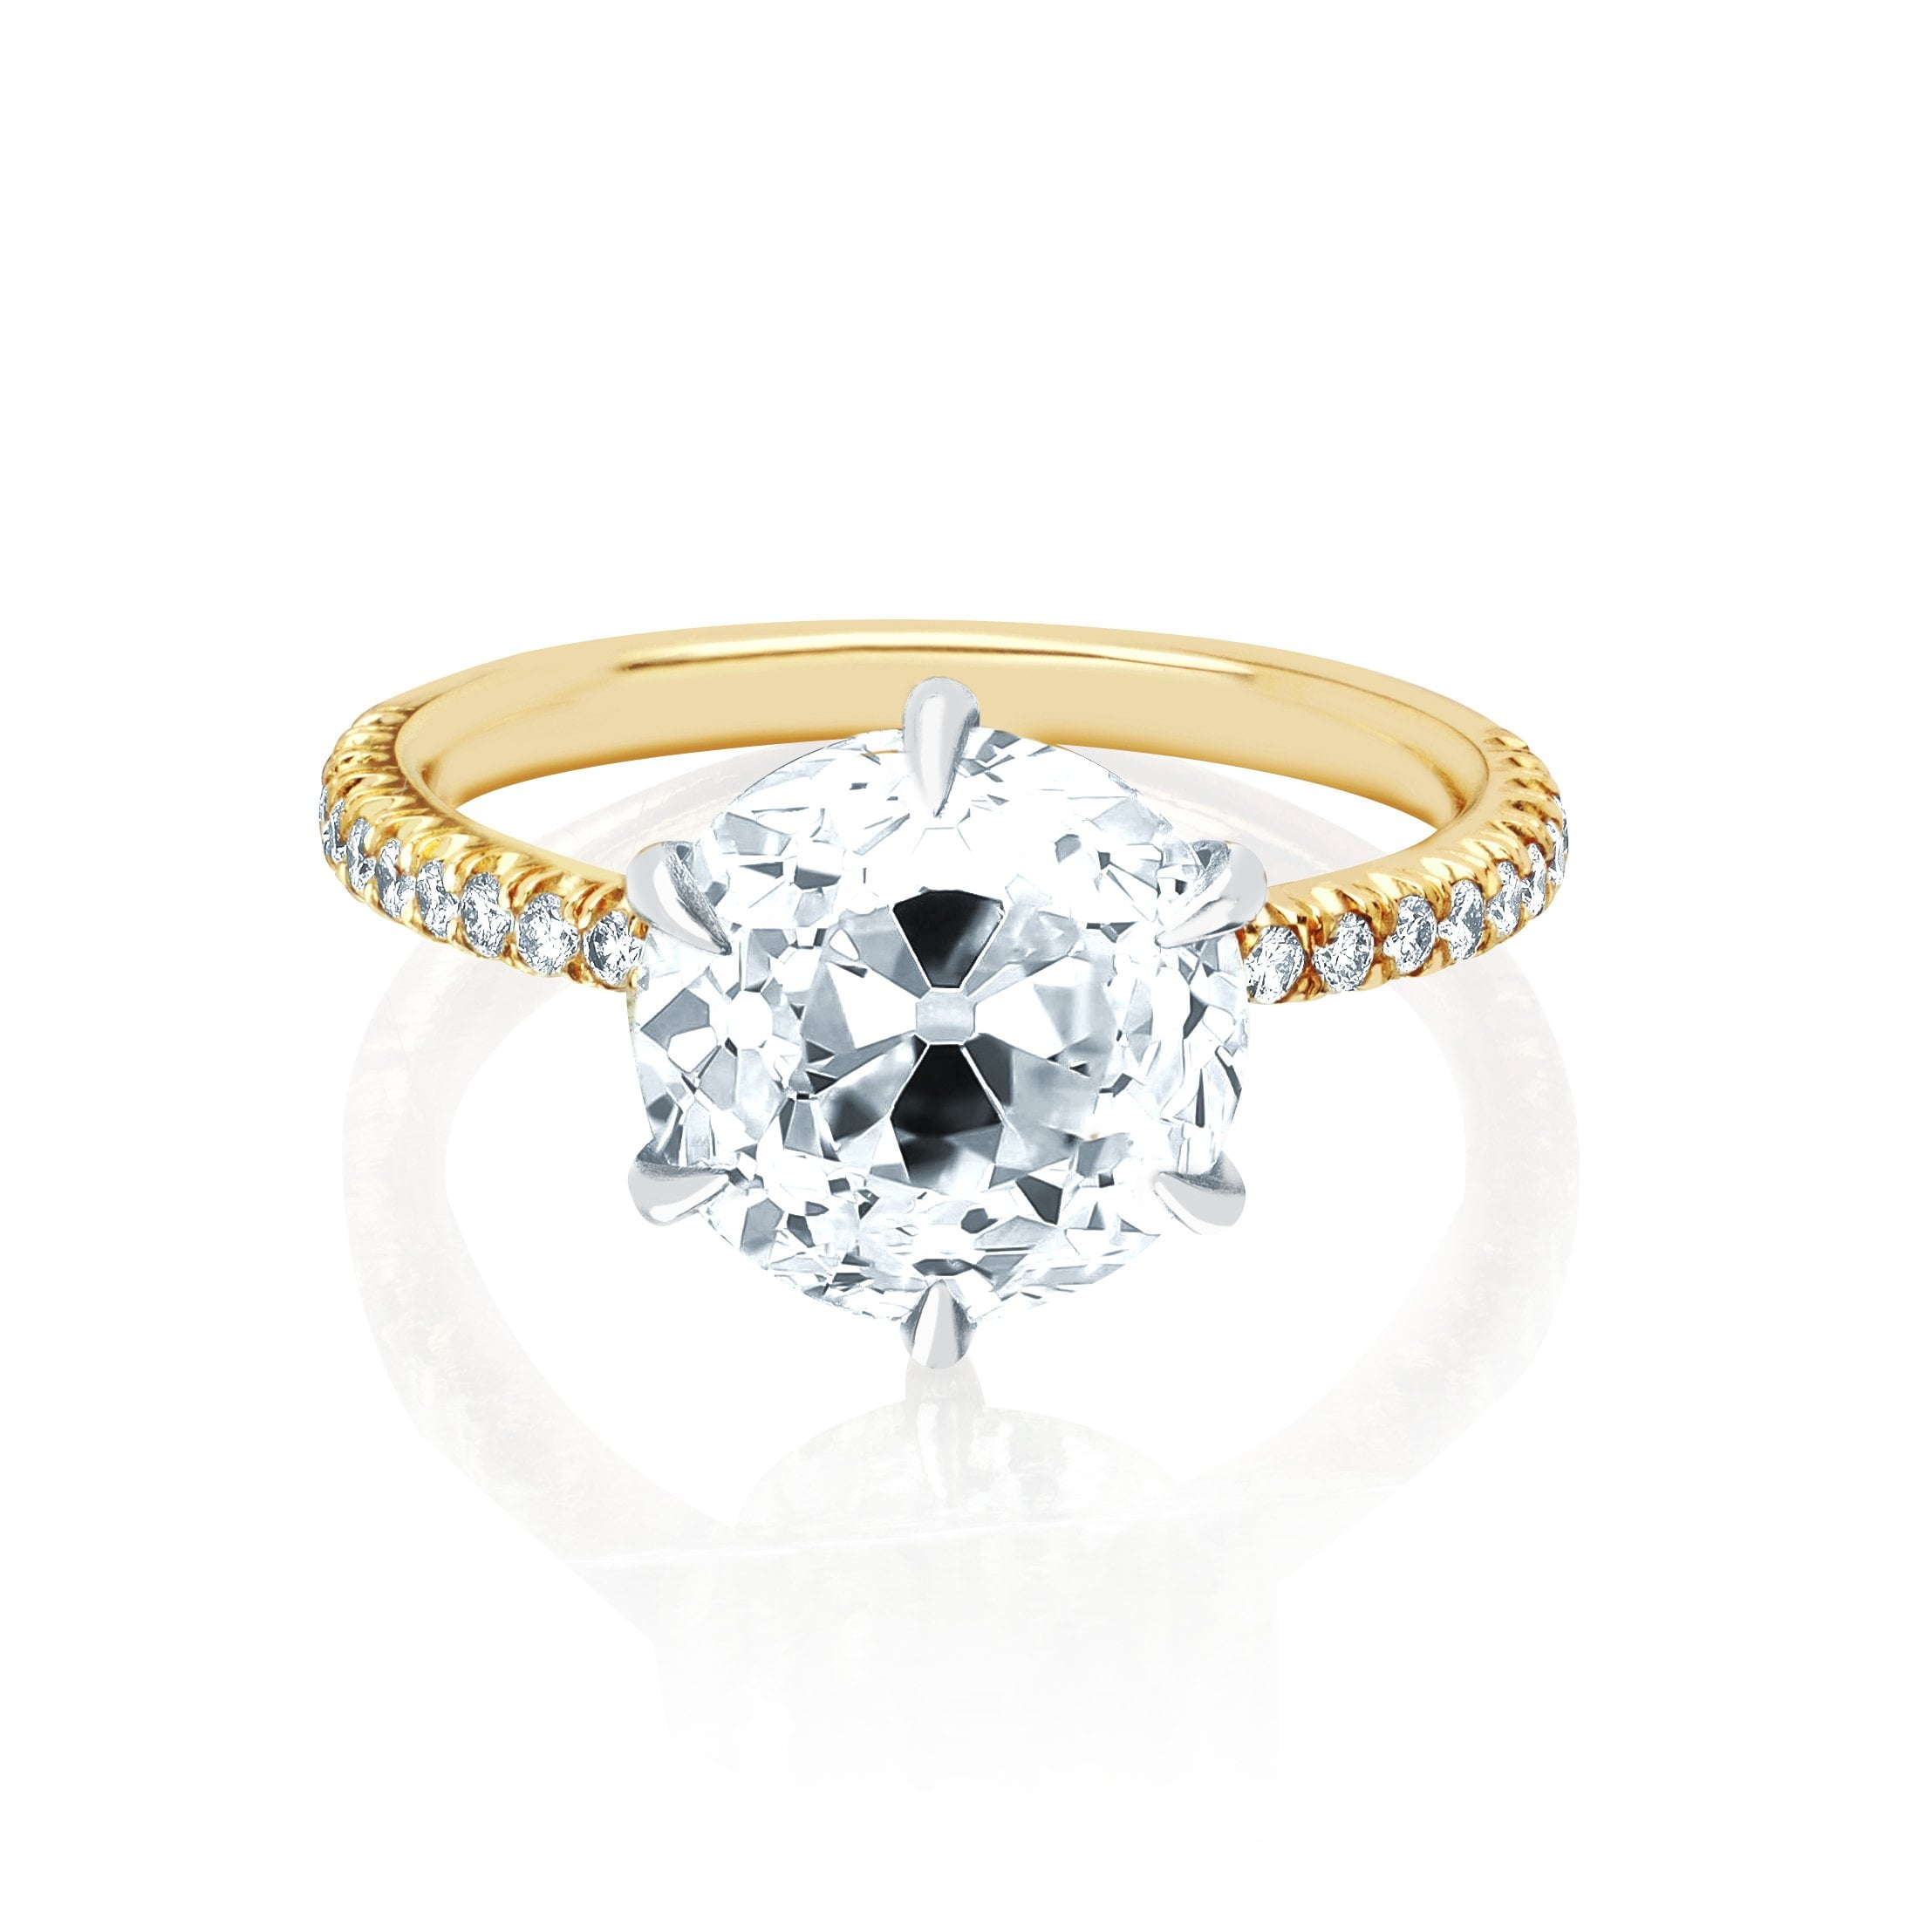 3.27ct Fancy Yellow Old Mine Cut Diamond Engagement Ring – Mark Broumand